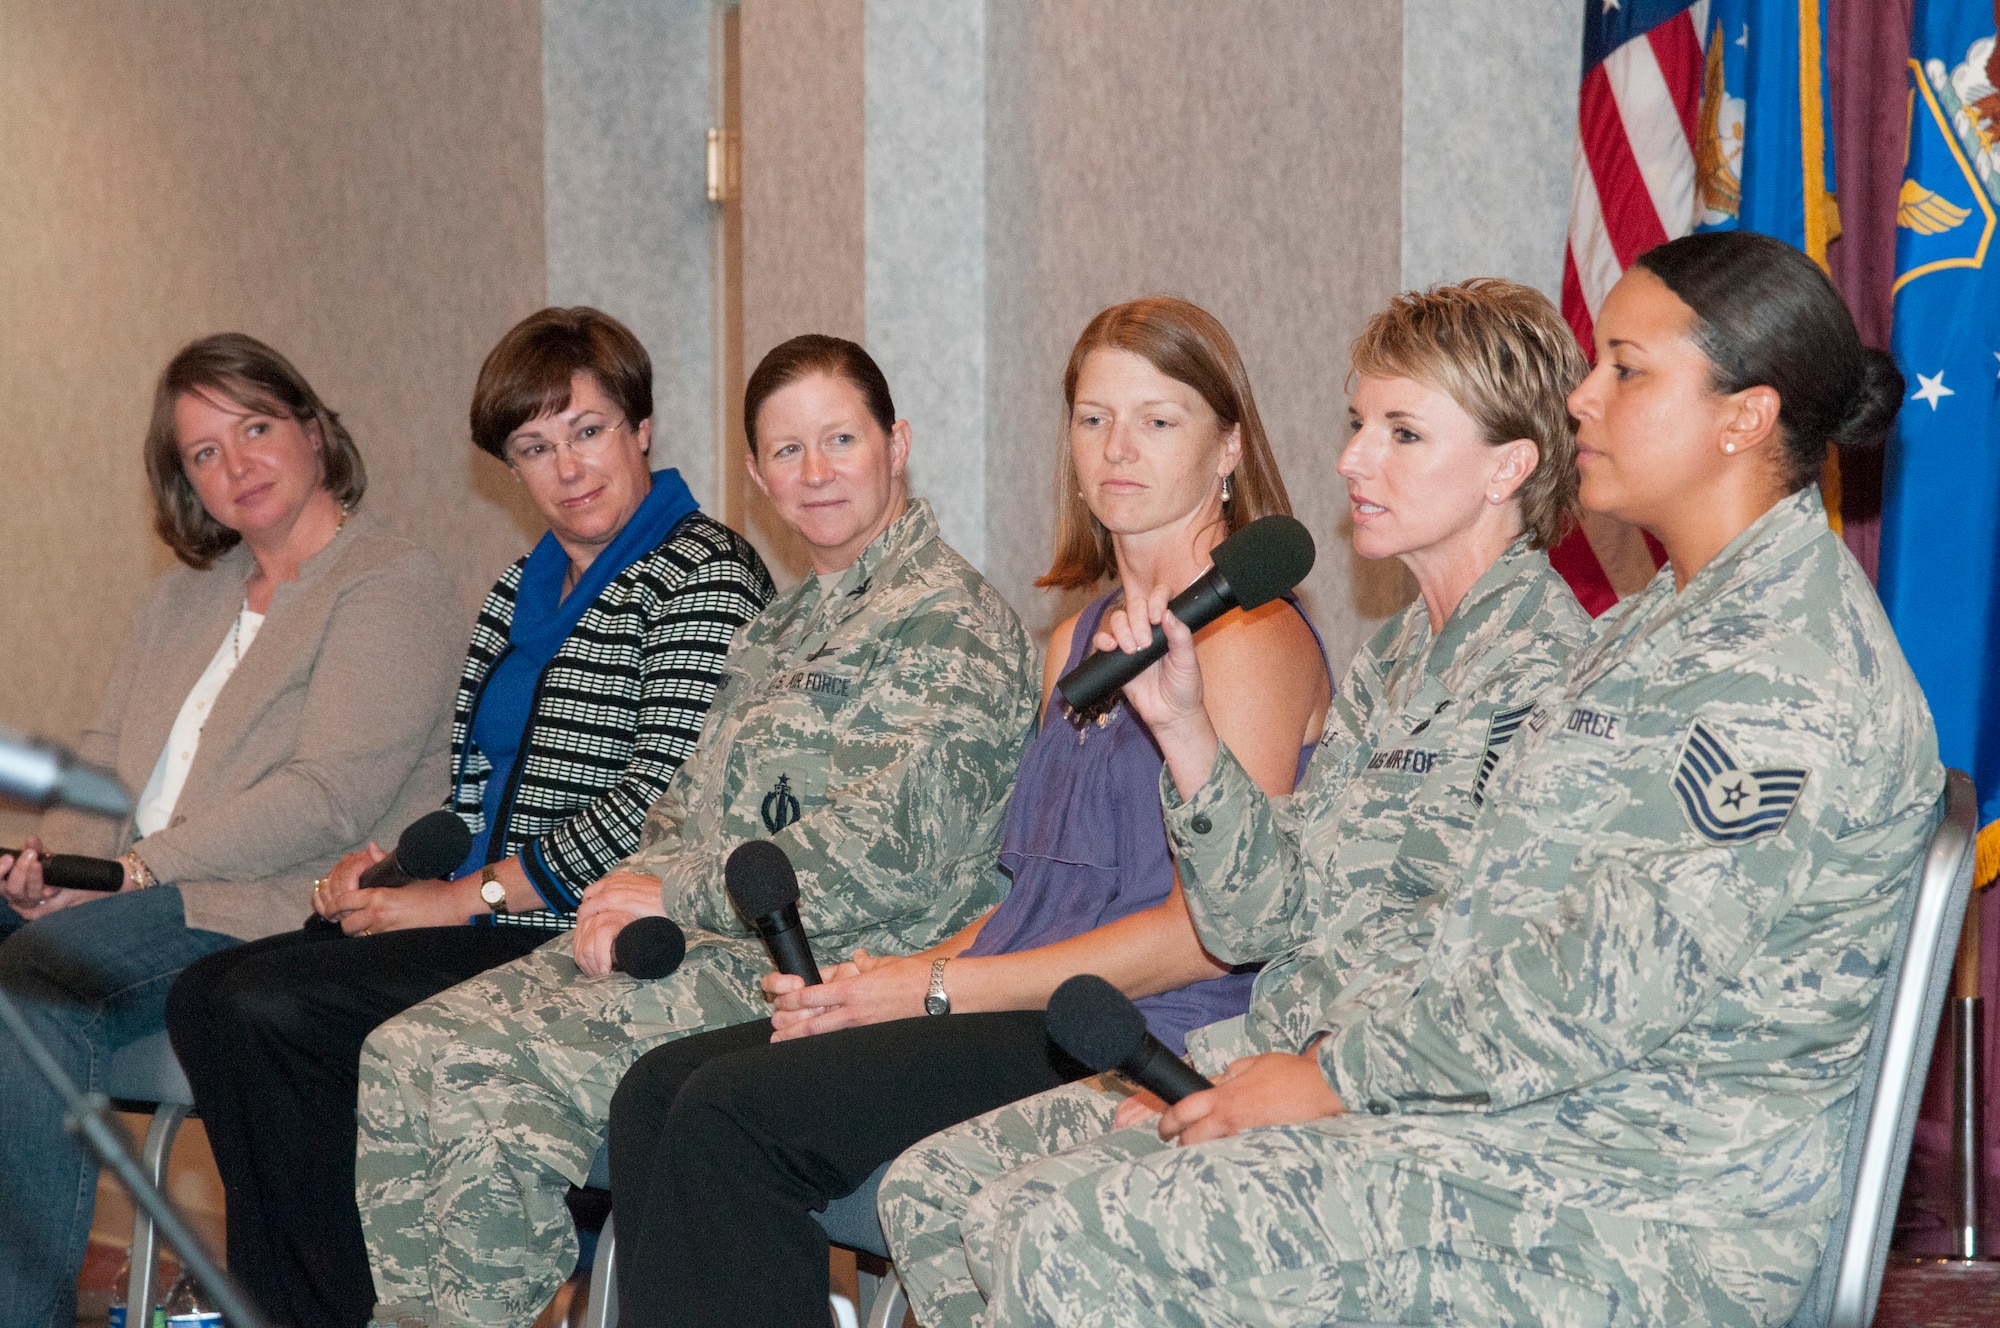 Chief Master Sgt. Gay Veale, 11th Air Force command chief, speaks to Airmen attending the 20th Air Force Women’s Leadership Symposium in the F.E. Warren Air Force Base, Wyo., Trail’s End Event Center Sept. 15, 2015. Veale was part of a panel of mentors who imparted advice and wisdom to the Airmen in attendance. (U.S. Air Force photo by Senior Airman Jason Wiese)